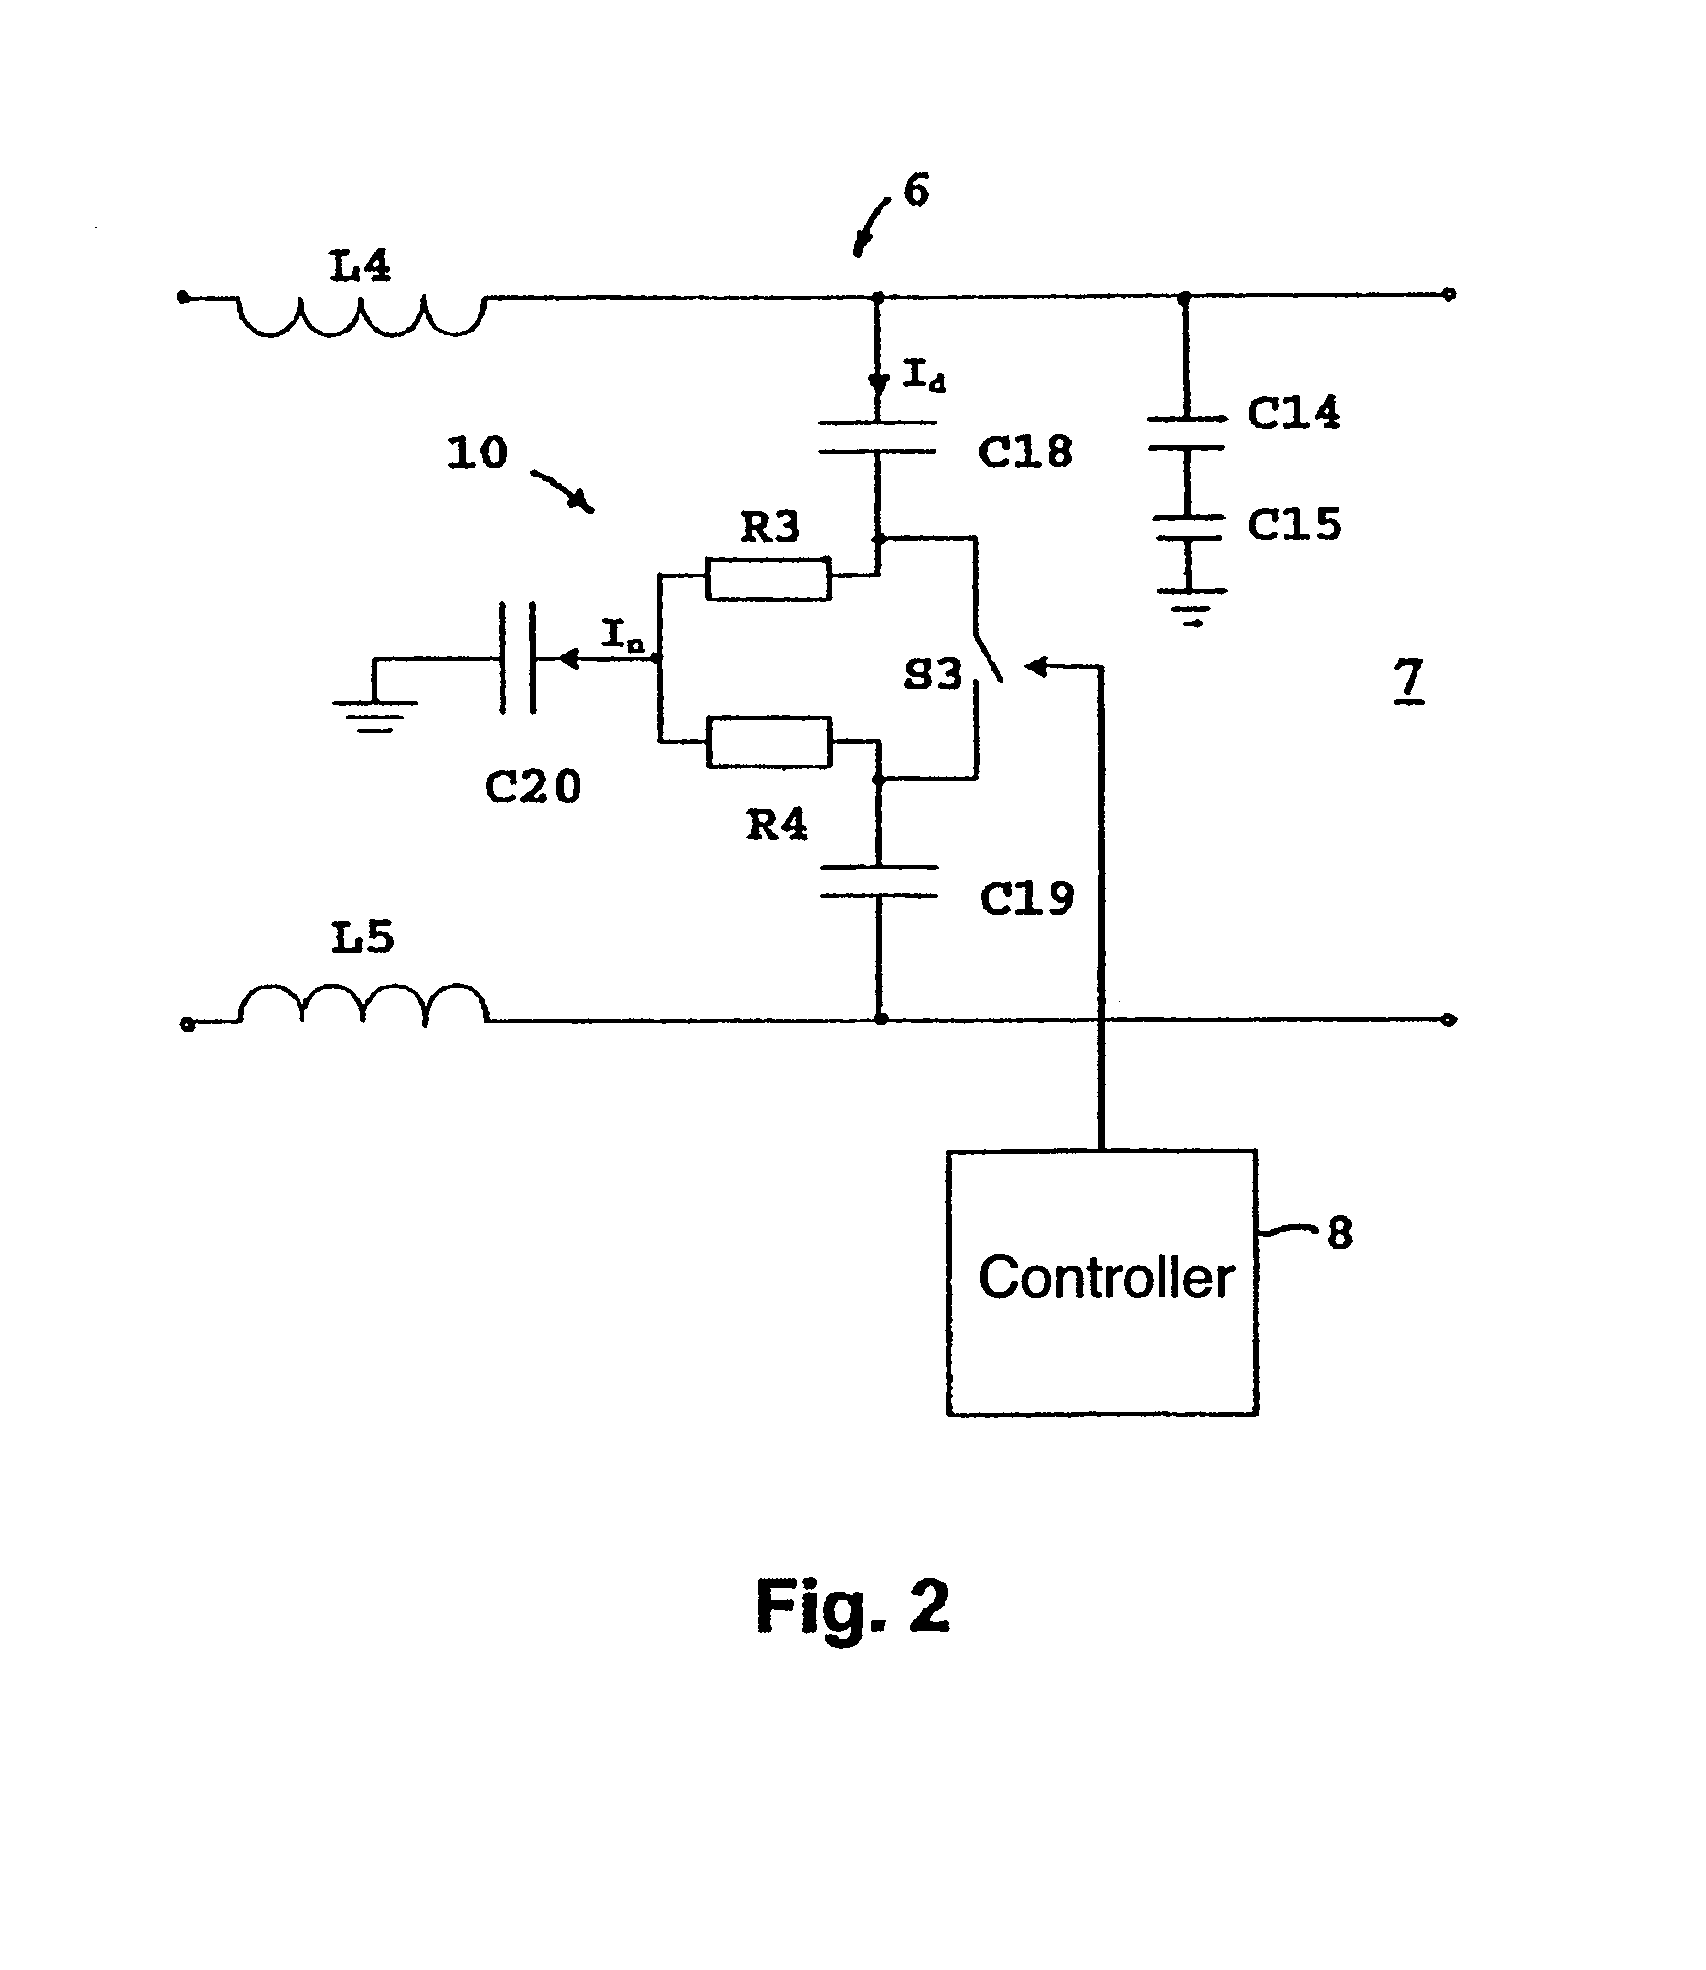 Motor controller incorporating an electronic circuit for protection against inrush currents